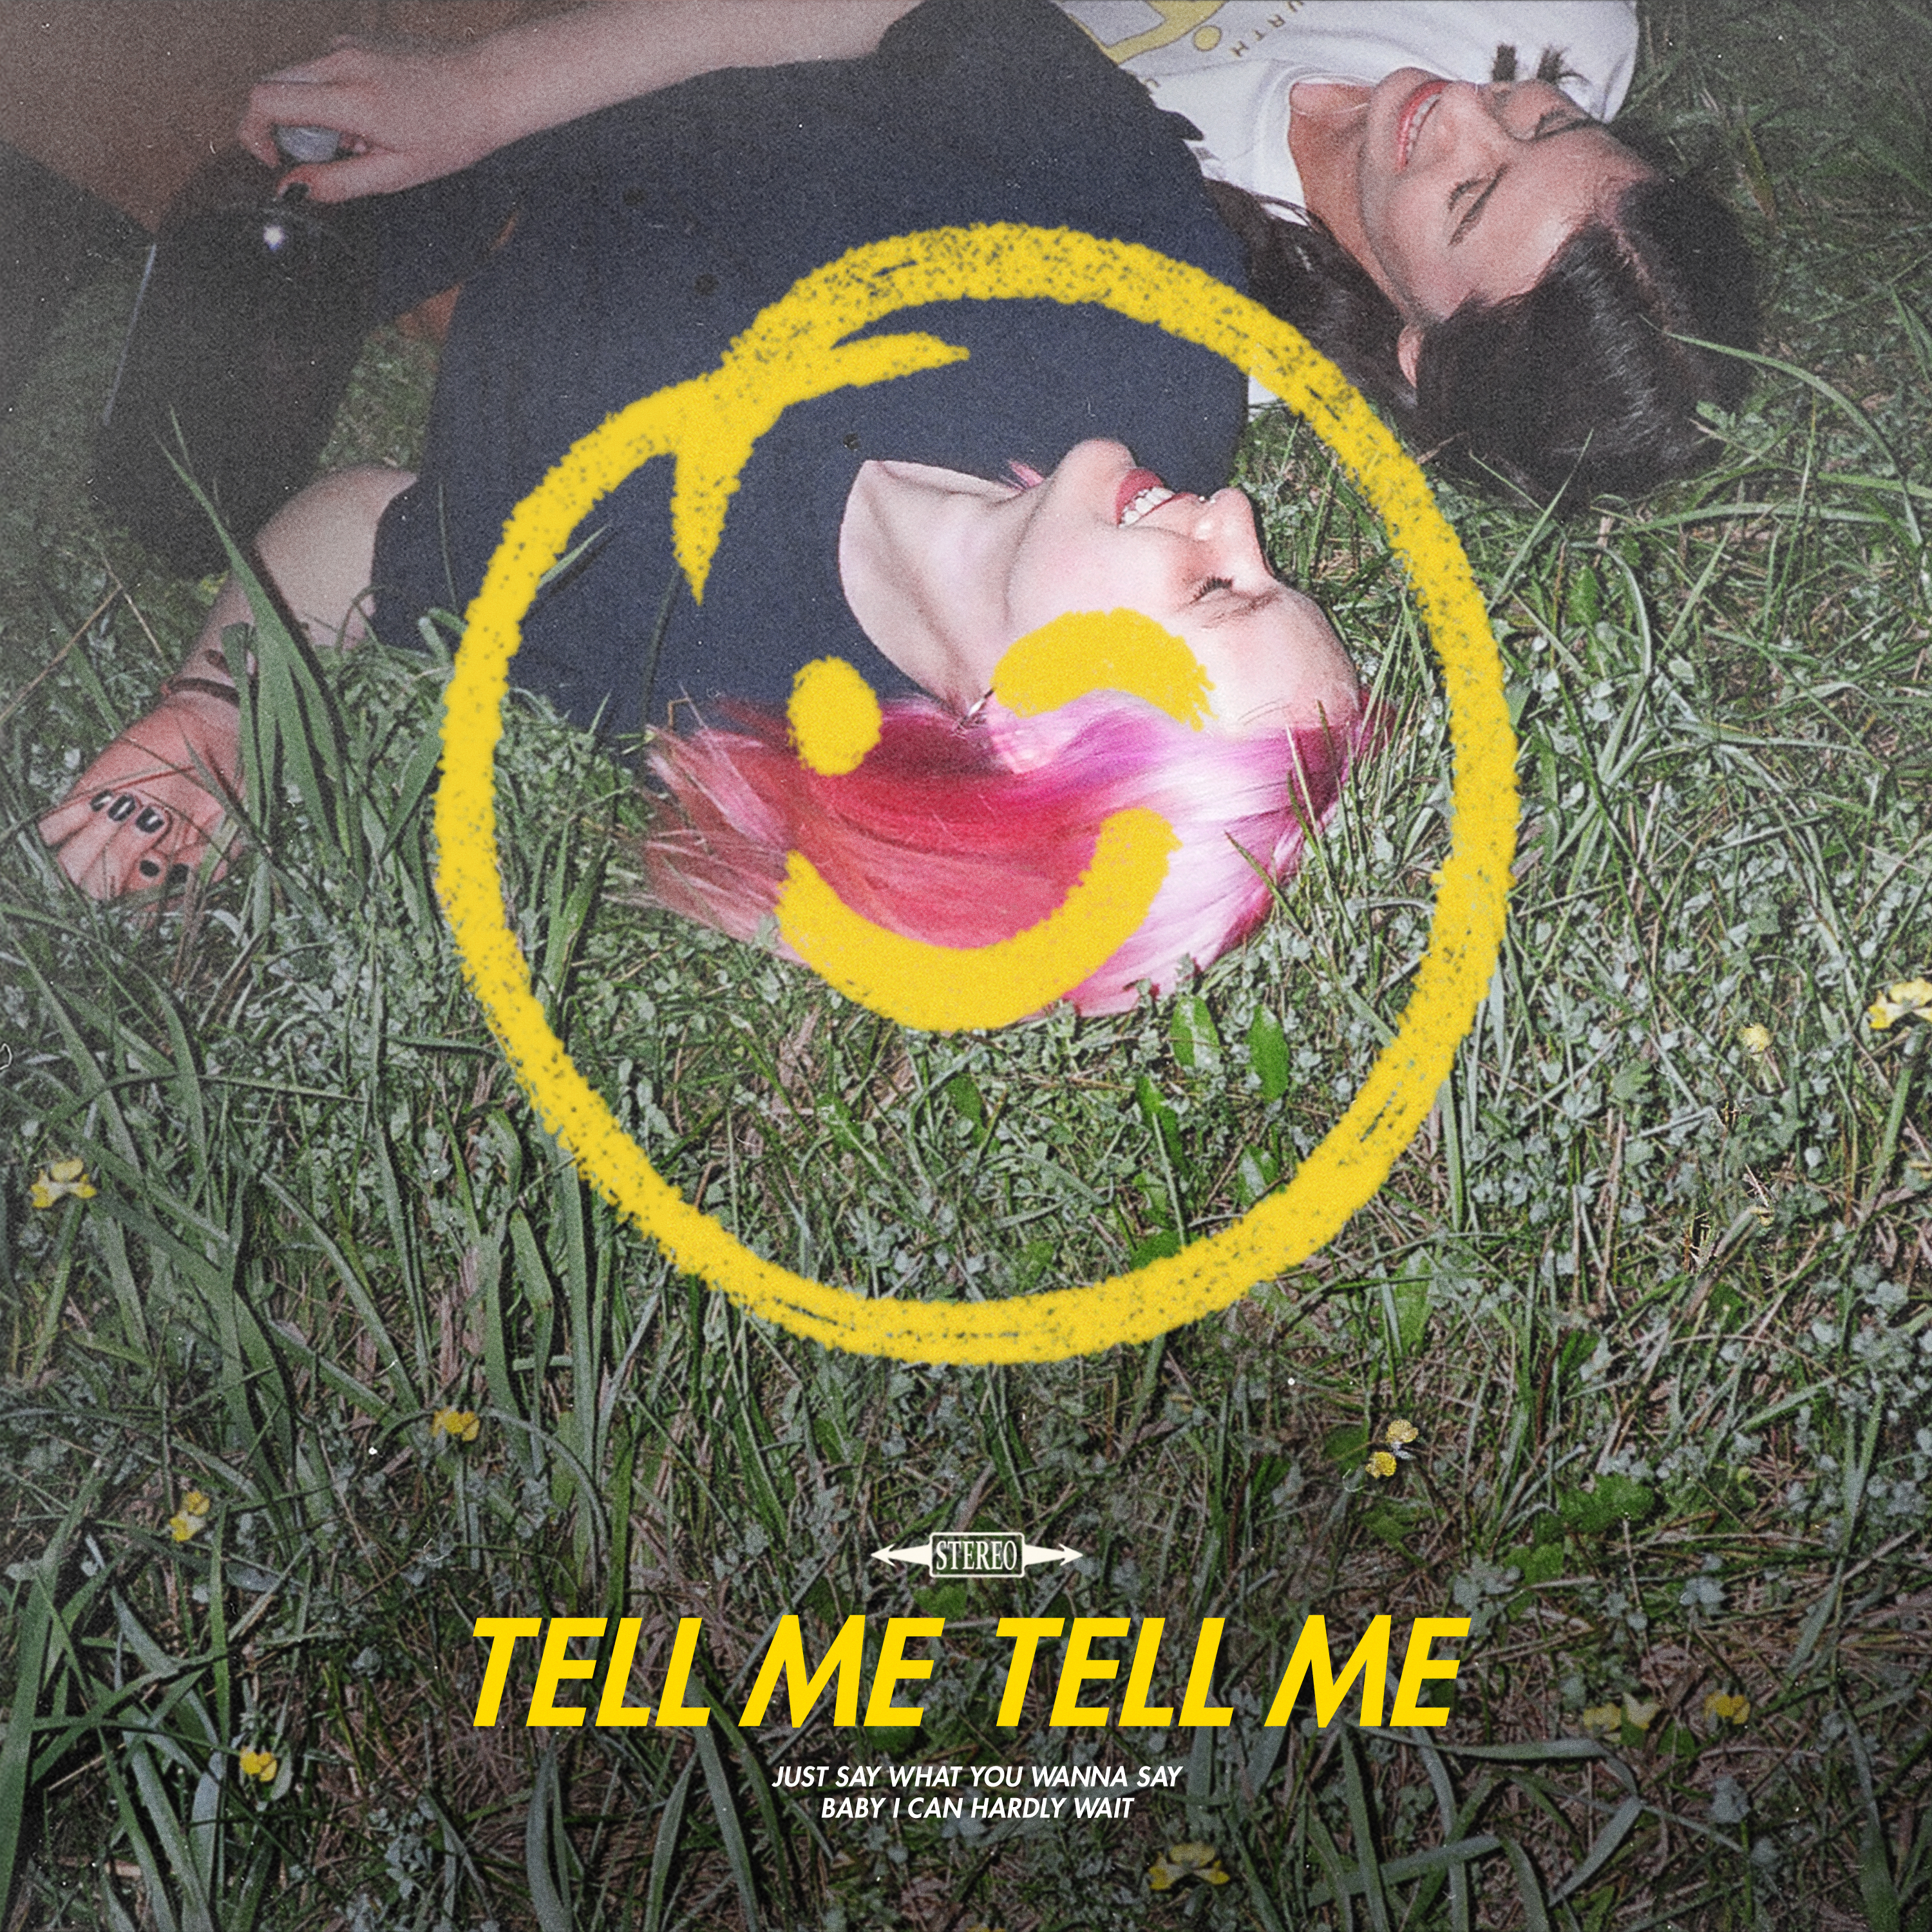 courtship. – “Tell Me Tell Me”